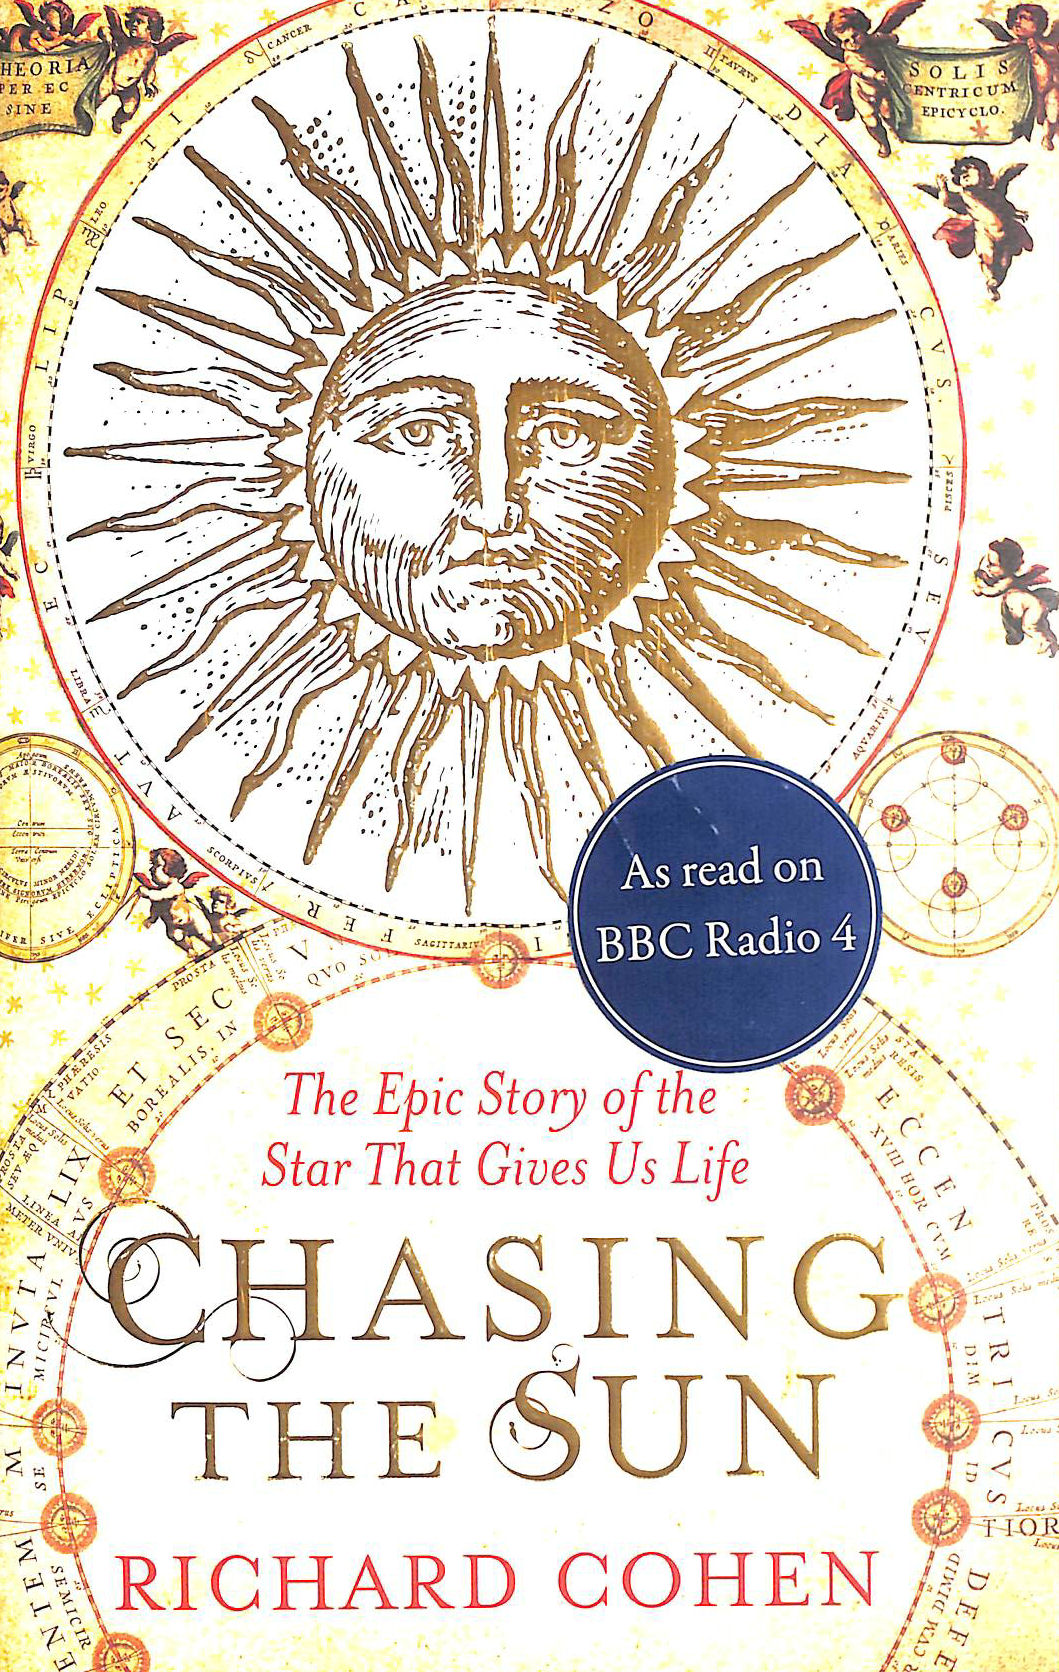 RICHARD COHEN - Chasing the Sun: The Epic Story of the Star That Gives Us Life